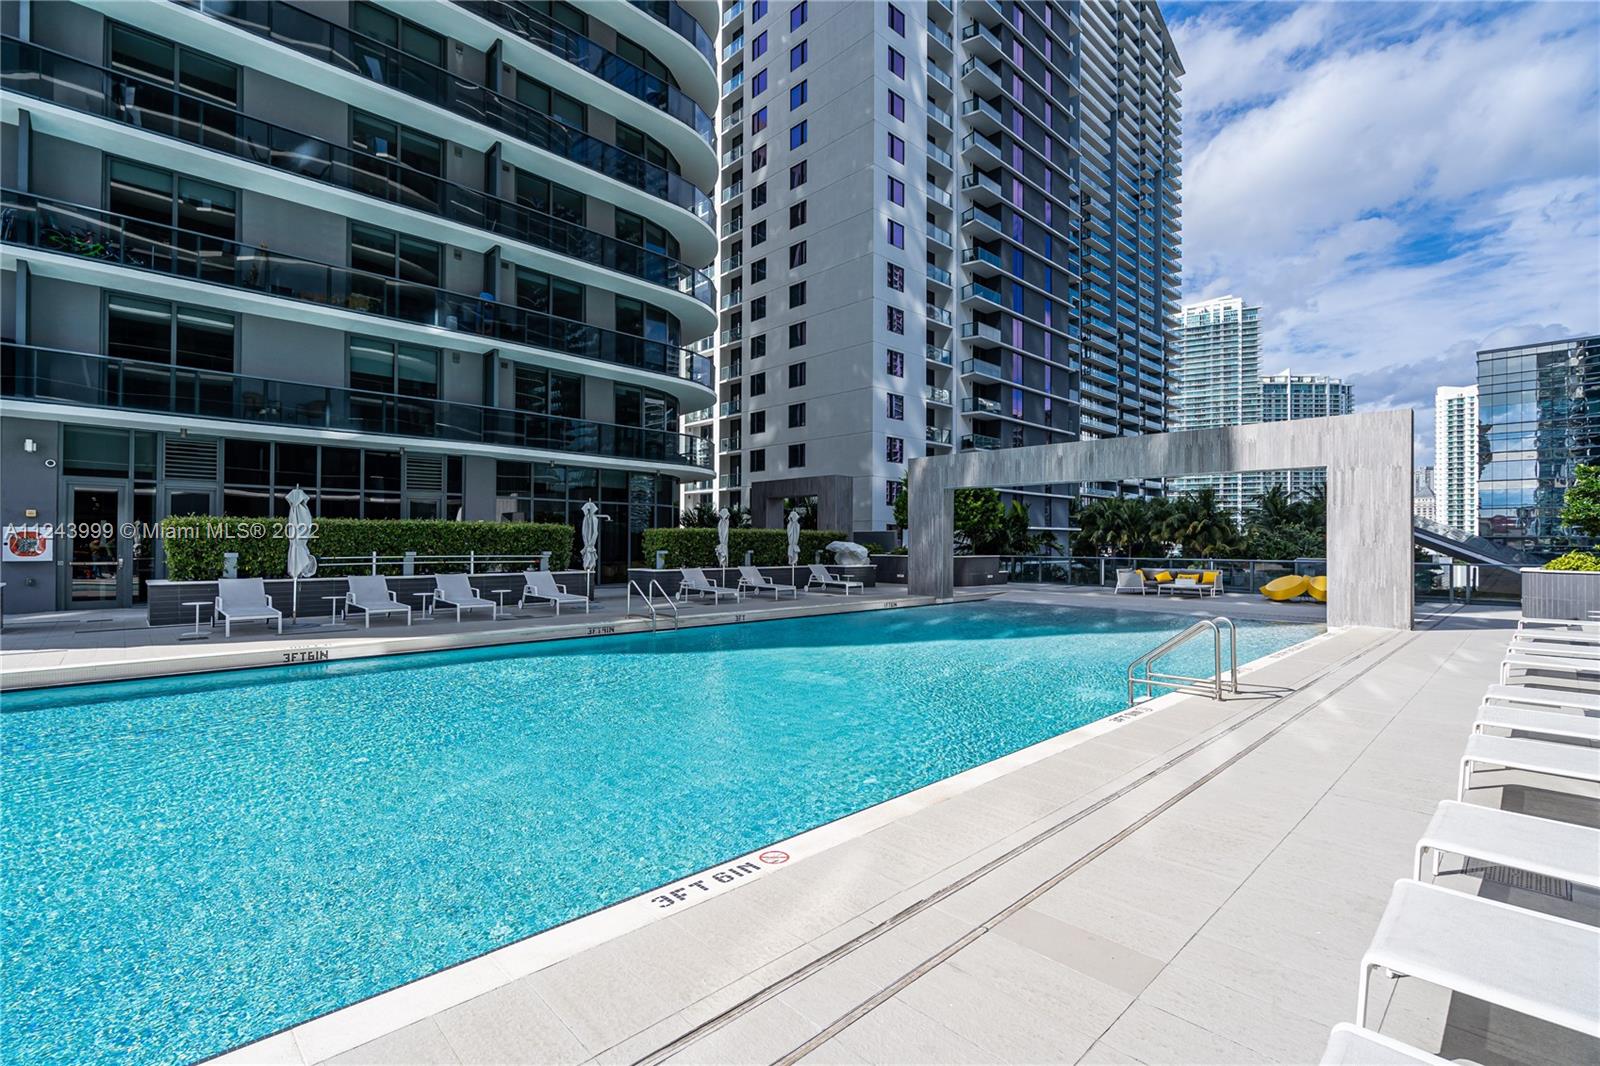 Brickell Heights East Tower image #4